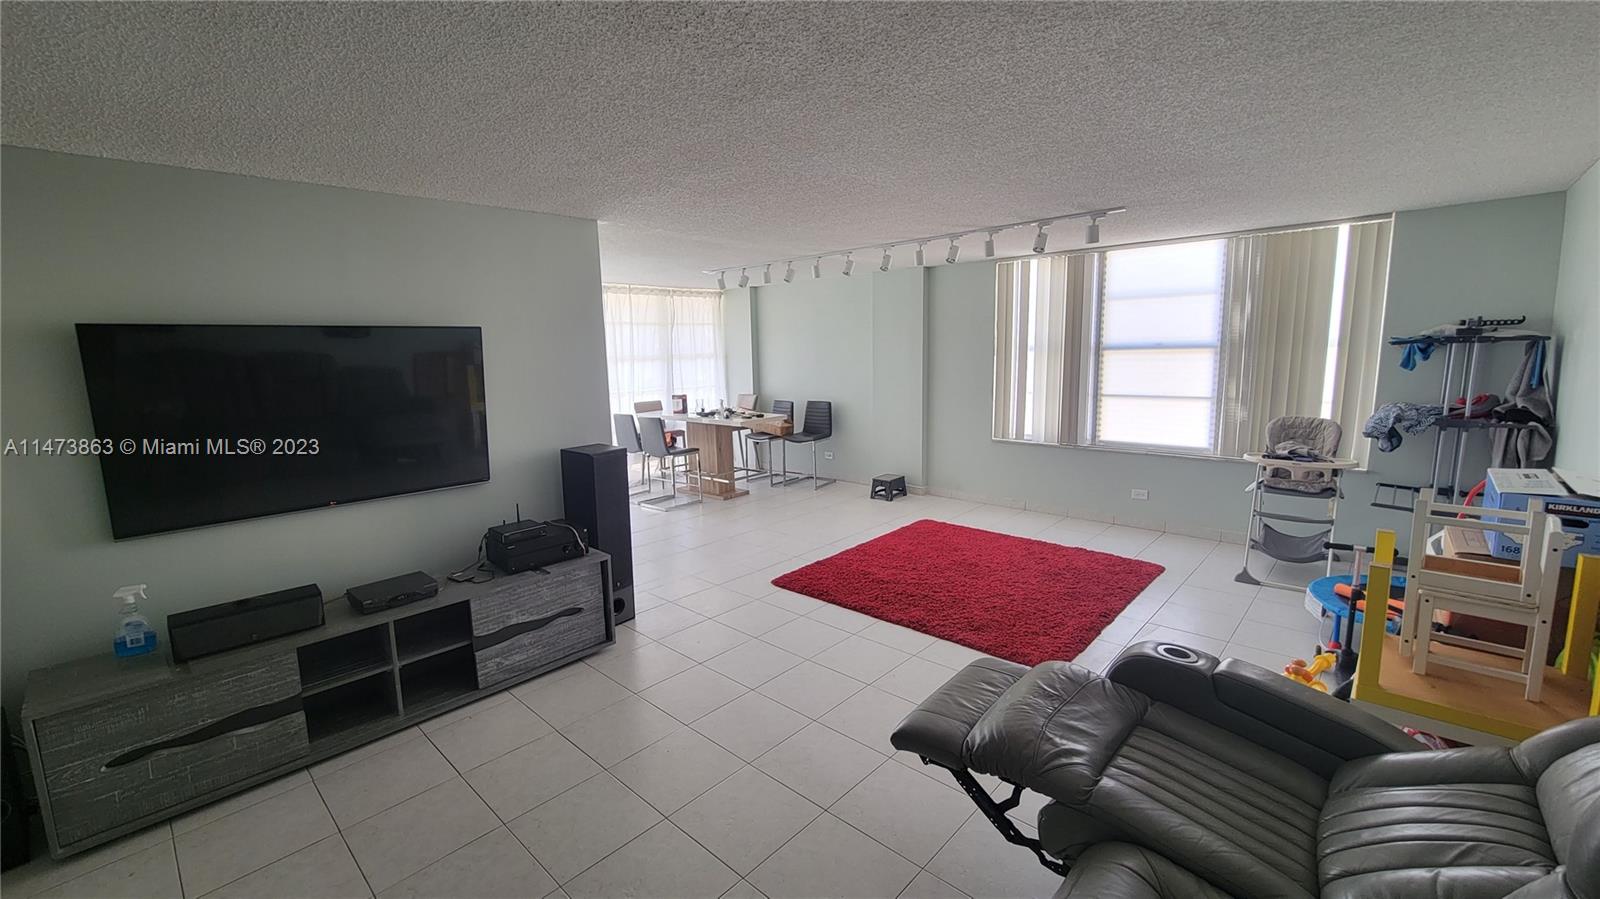 Property for Sale at Address Not Disclosed, Sunny Isles Beach, Miami-Dade County, Florida - Bedrooms: 2 
Bathrooms: 2  - $445,000